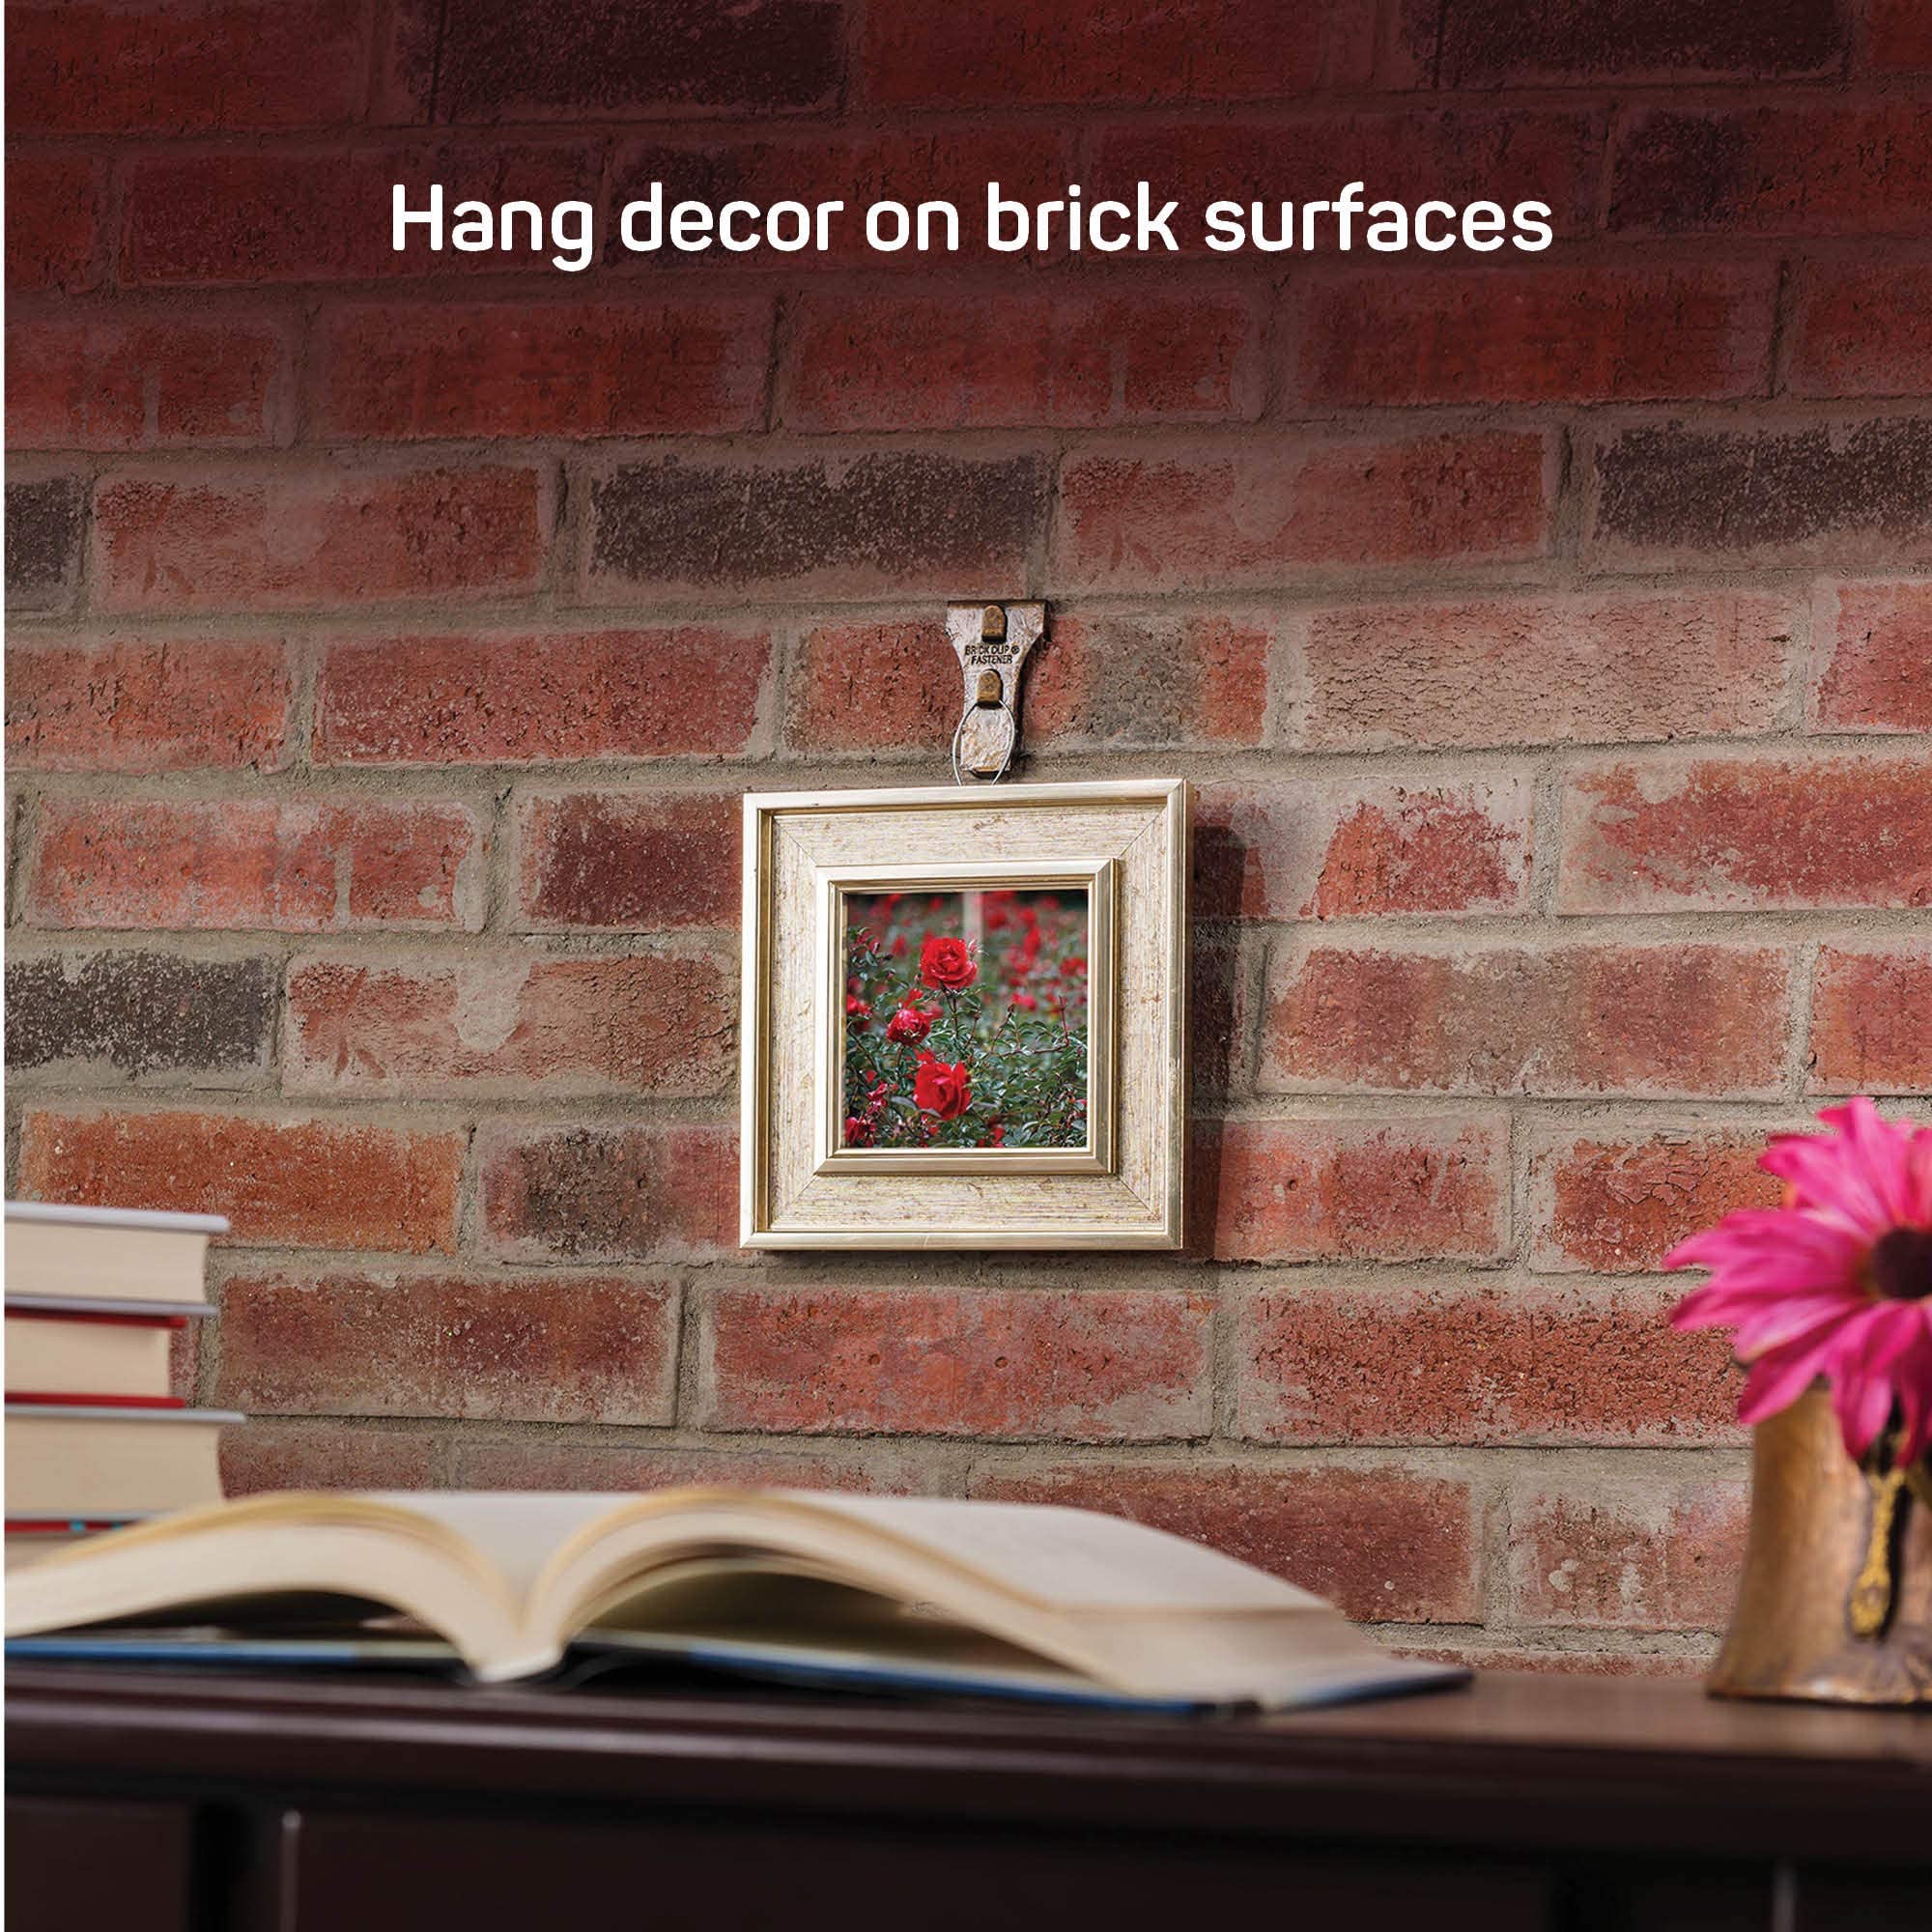 Brick Clips Hanger [Set of 8] Metal Brick Clip for Hanging Outdoors, Hanging Wreaths, Hanging Garlands, Hanging Lights, Hanging Wall Pictures & All Decor Hanging - Holds Up to 25 Pounds - Made in USA  - Very Good